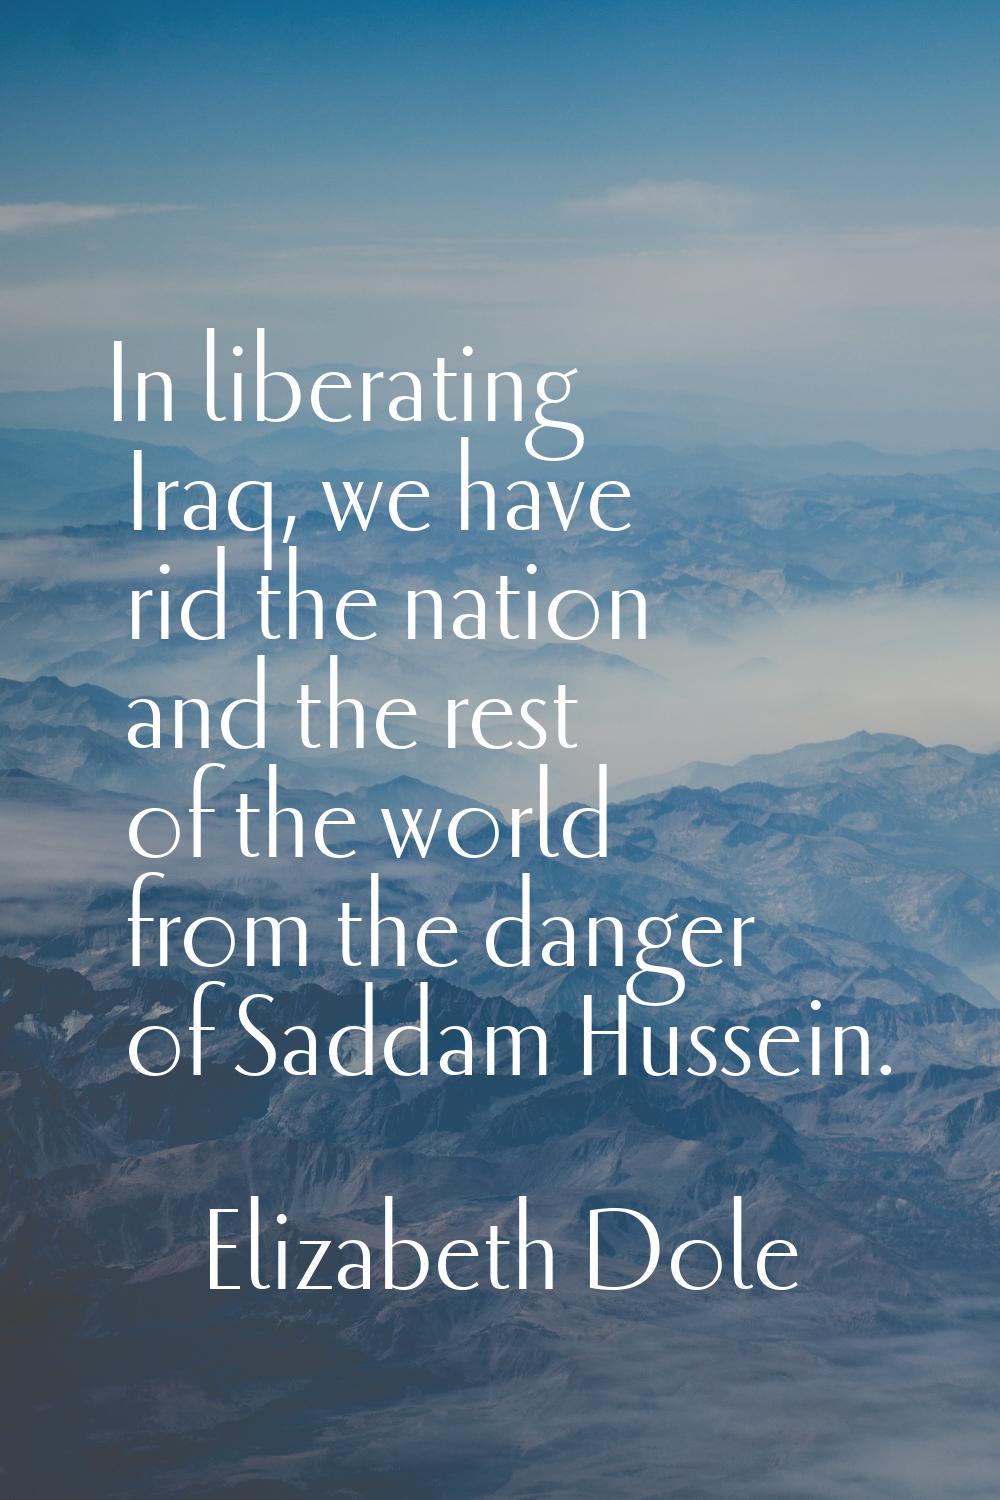 In liberating Iraq, we have rid the nation and the rest of the world from the danger of Saddam Huss